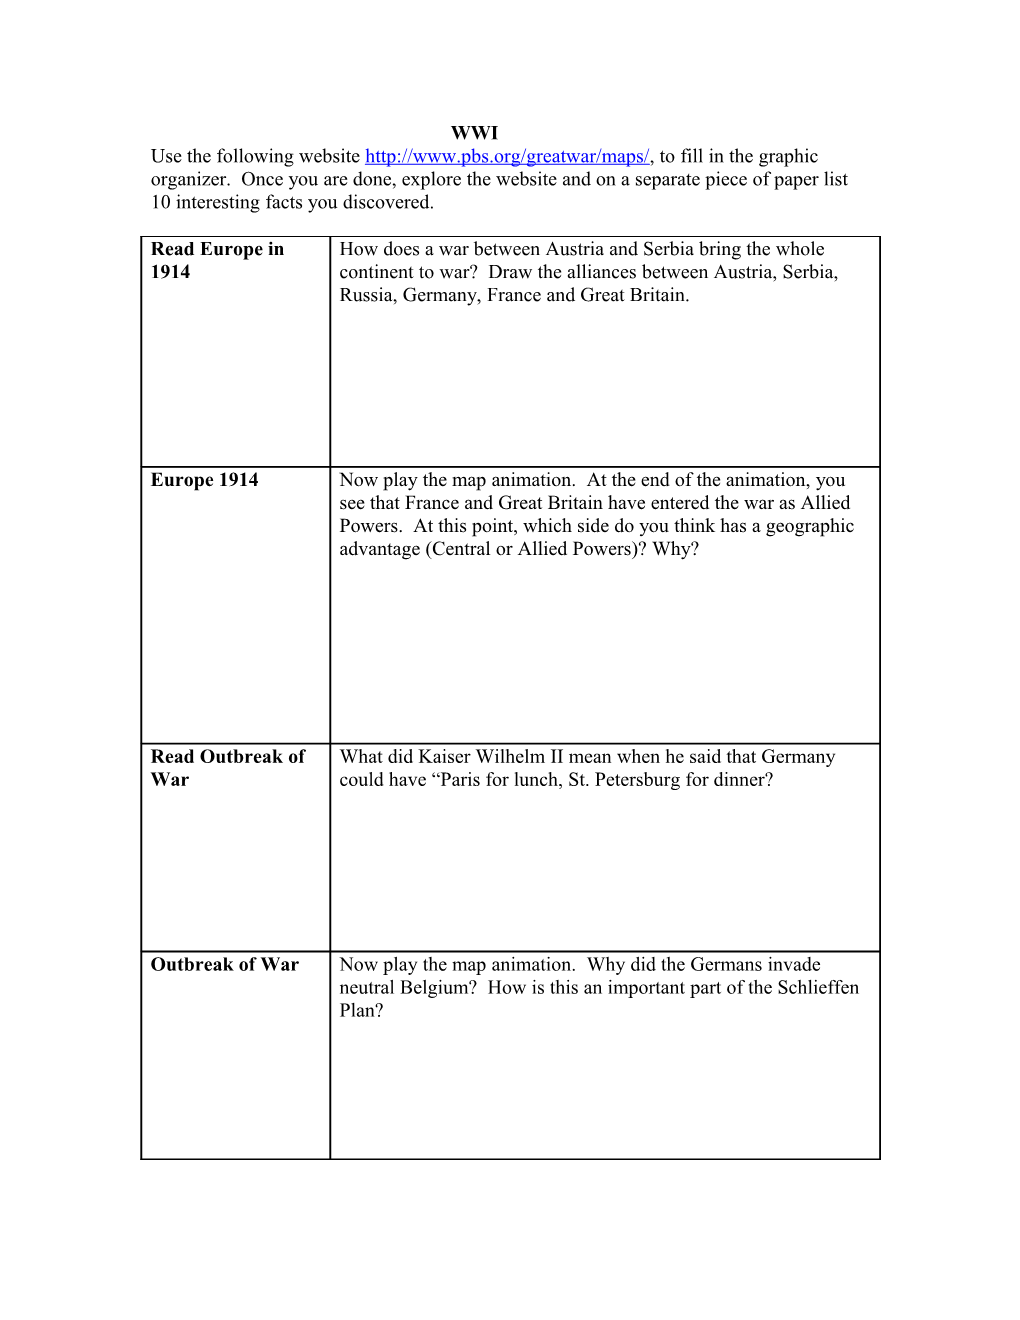 Use the Following Website to Fill in the Graphic Organizer. Once You Are Done, Explore